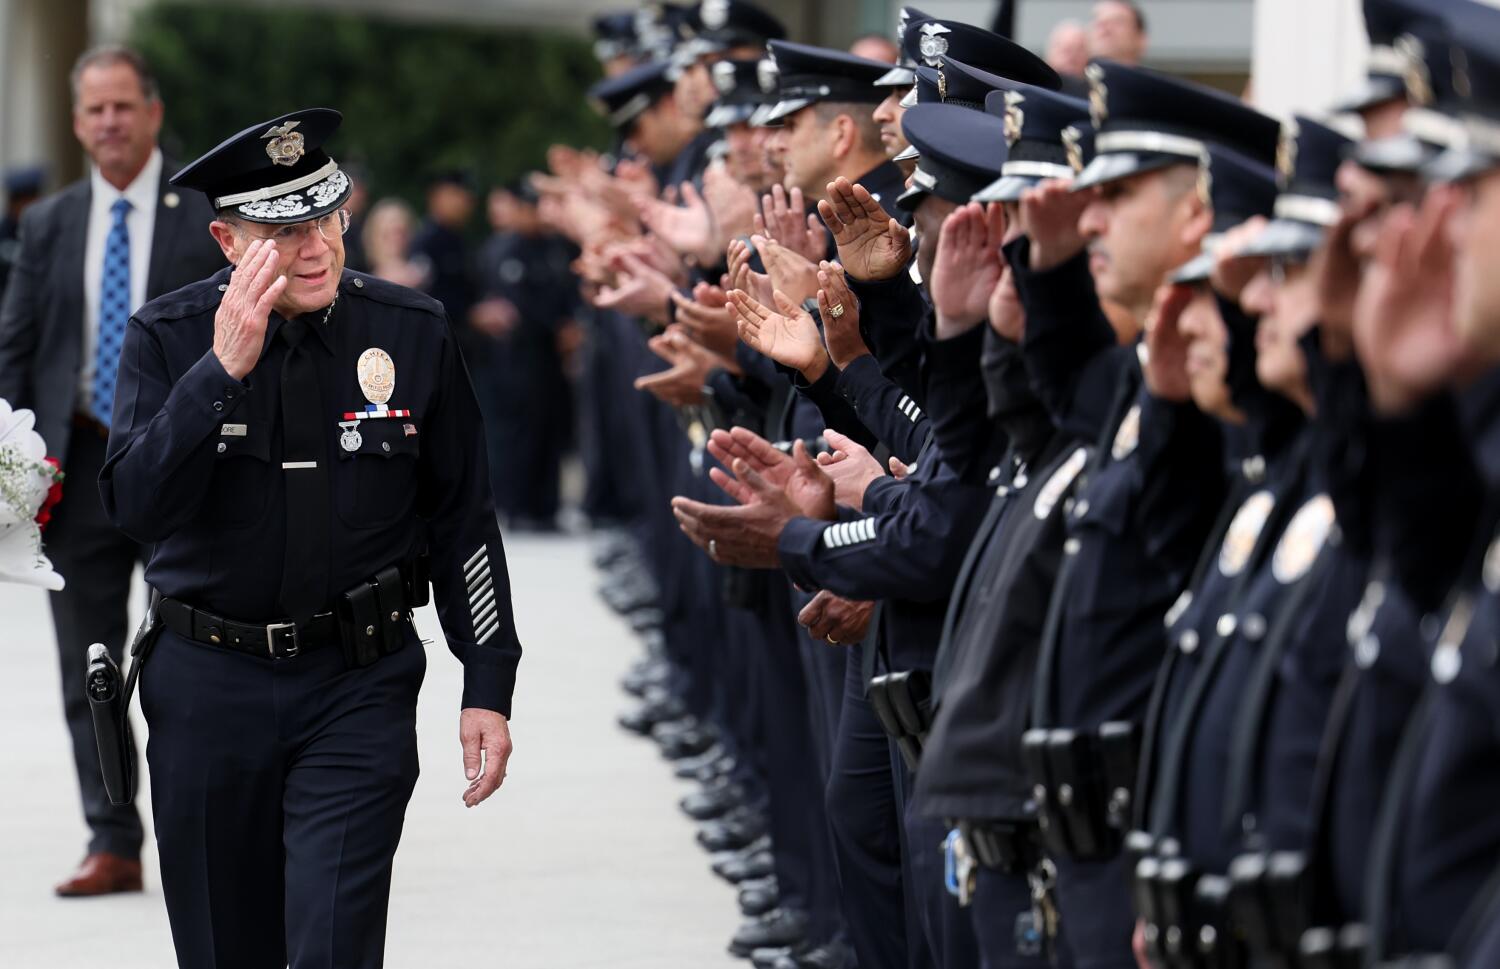 An outsider as next LAPD chief? Candidates face culture that has 'spit out' past leaders